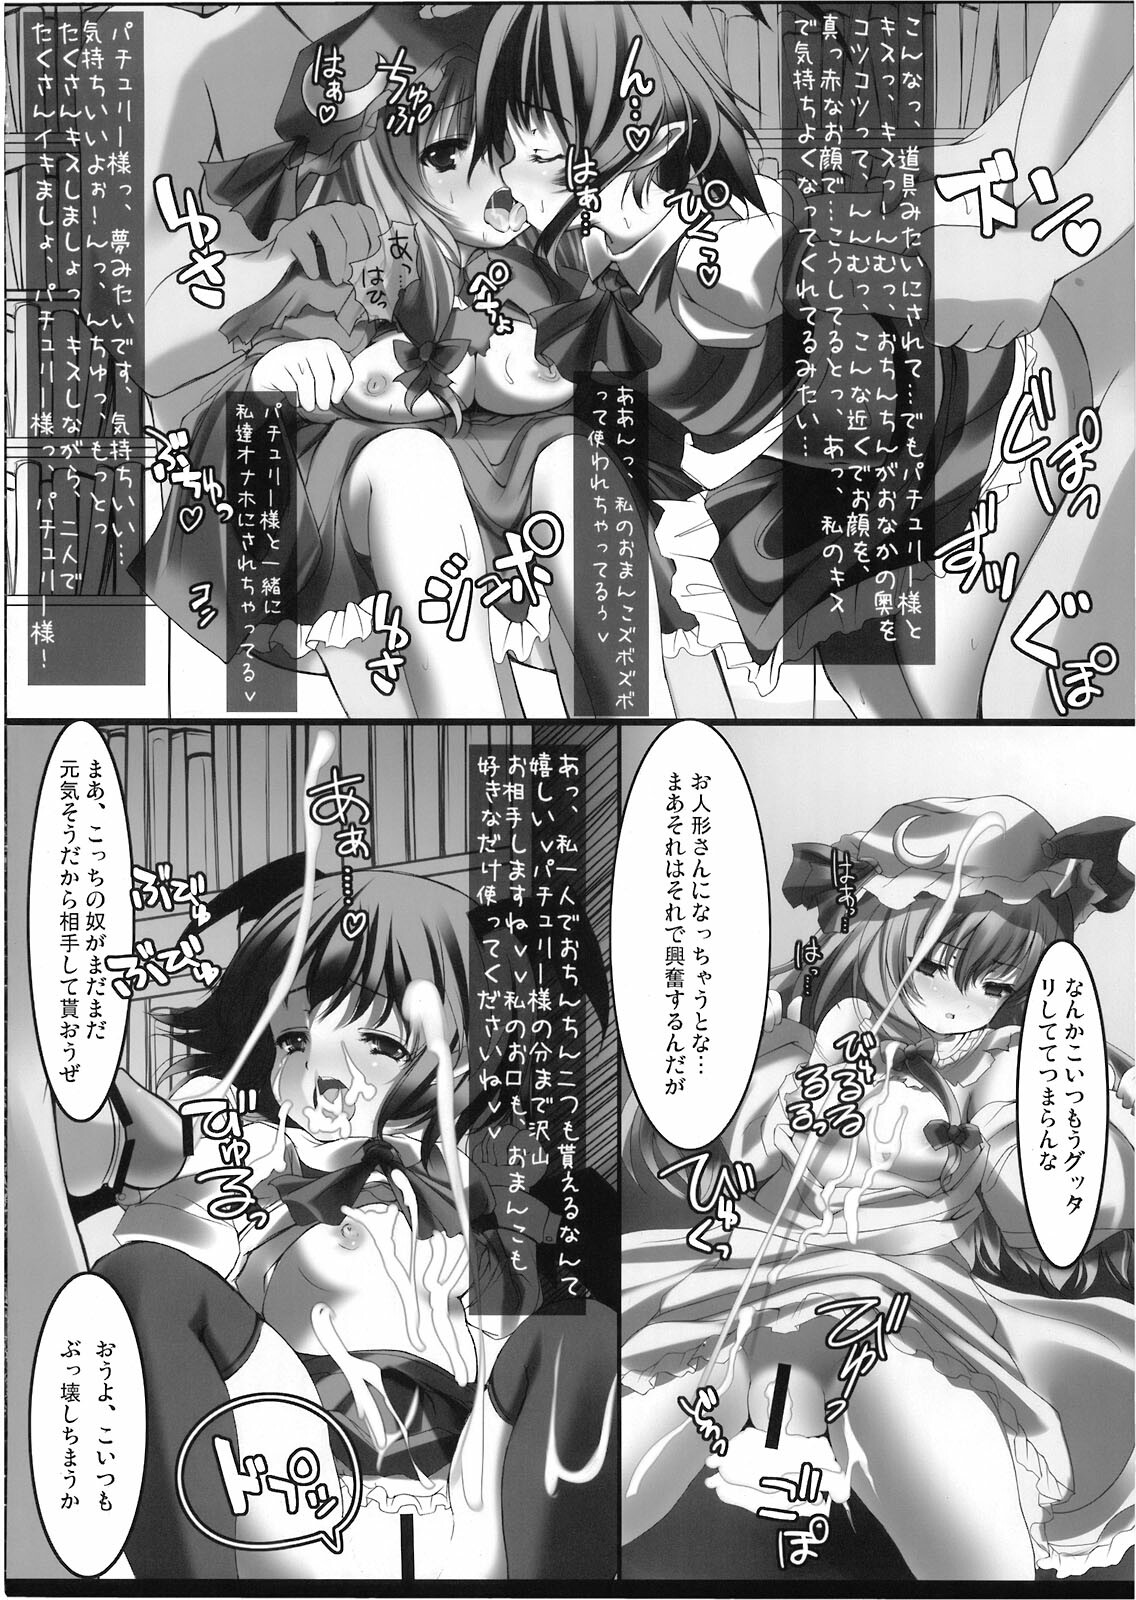 [EARNESTLY JET CITY] 幻想郷 爆!! (Touhou) page 18 full